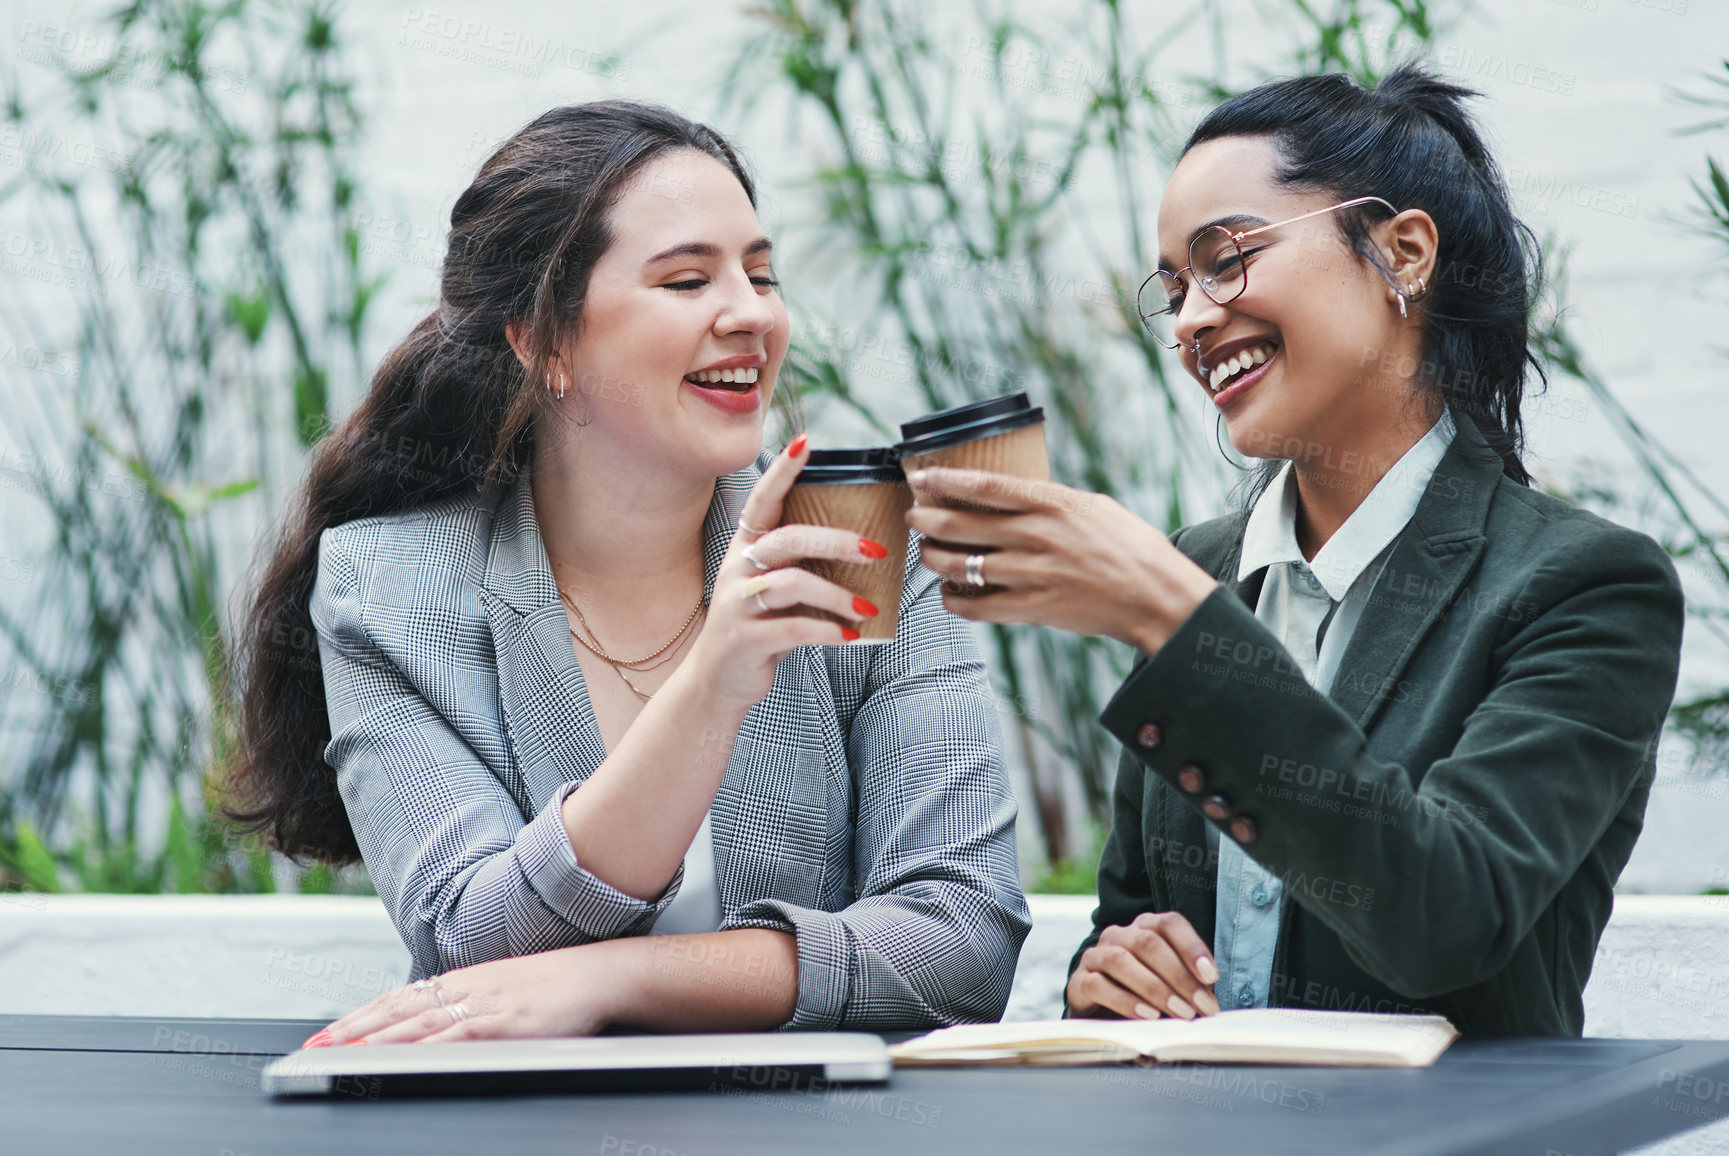 Buy stock photo Shot of two young businesswomen toasting with coffee during a business meeting